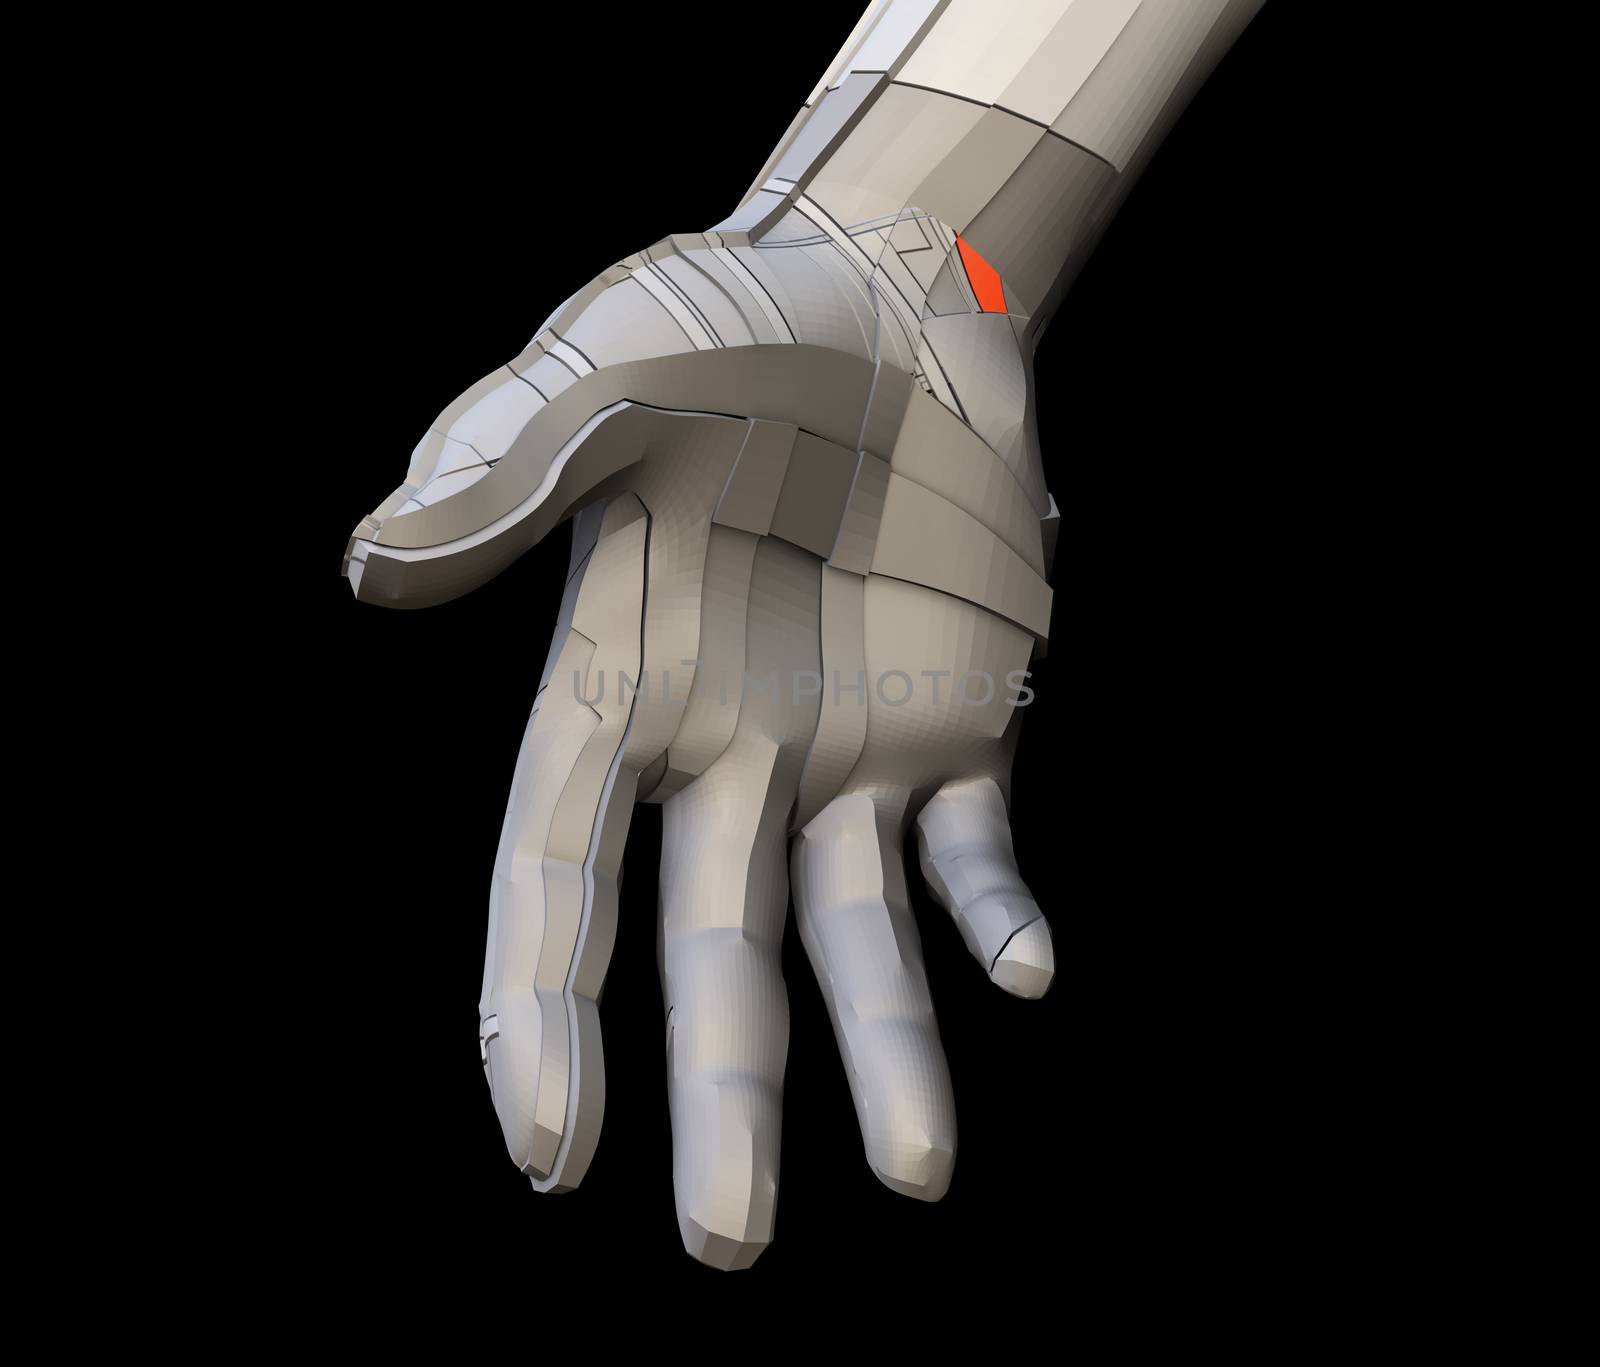 Futuristic robot hand of dark color with luminous parts of blue and orange. Isolated on black background. The concept of robotic and industrial revolution 4.0. 3D illustration